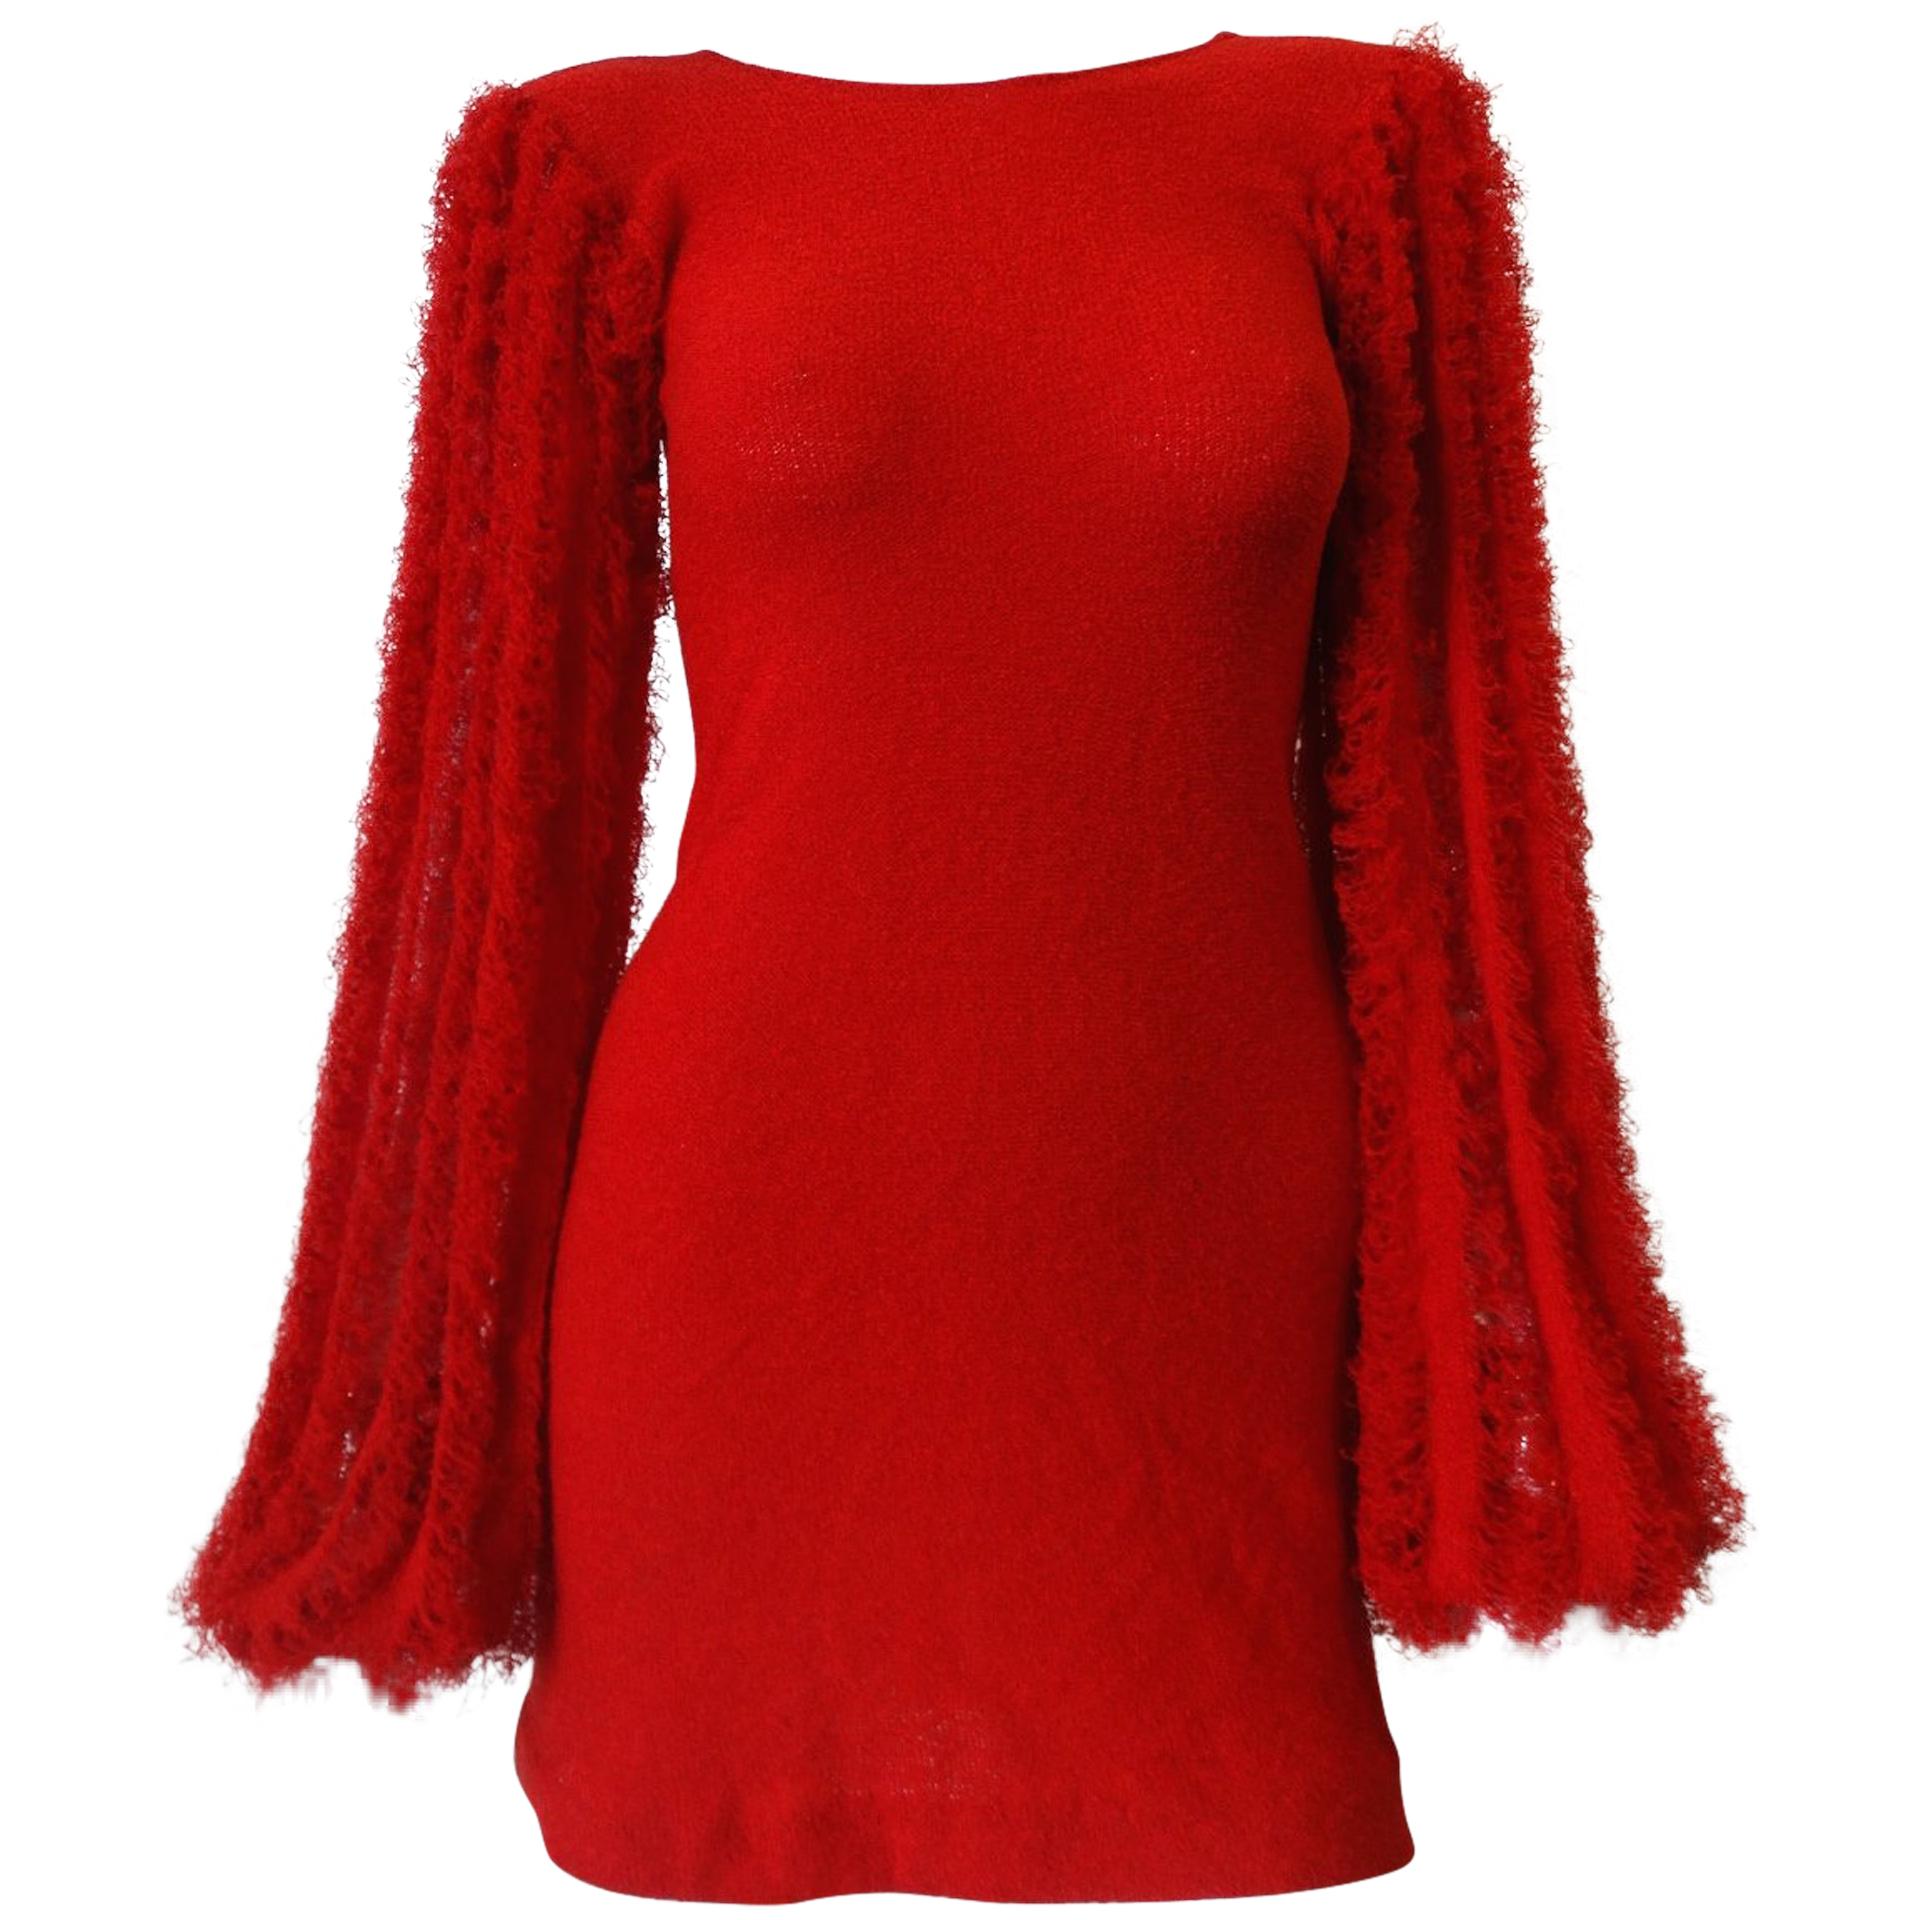 1980s Red Knit Mini Dress With Dramatic Sleeves